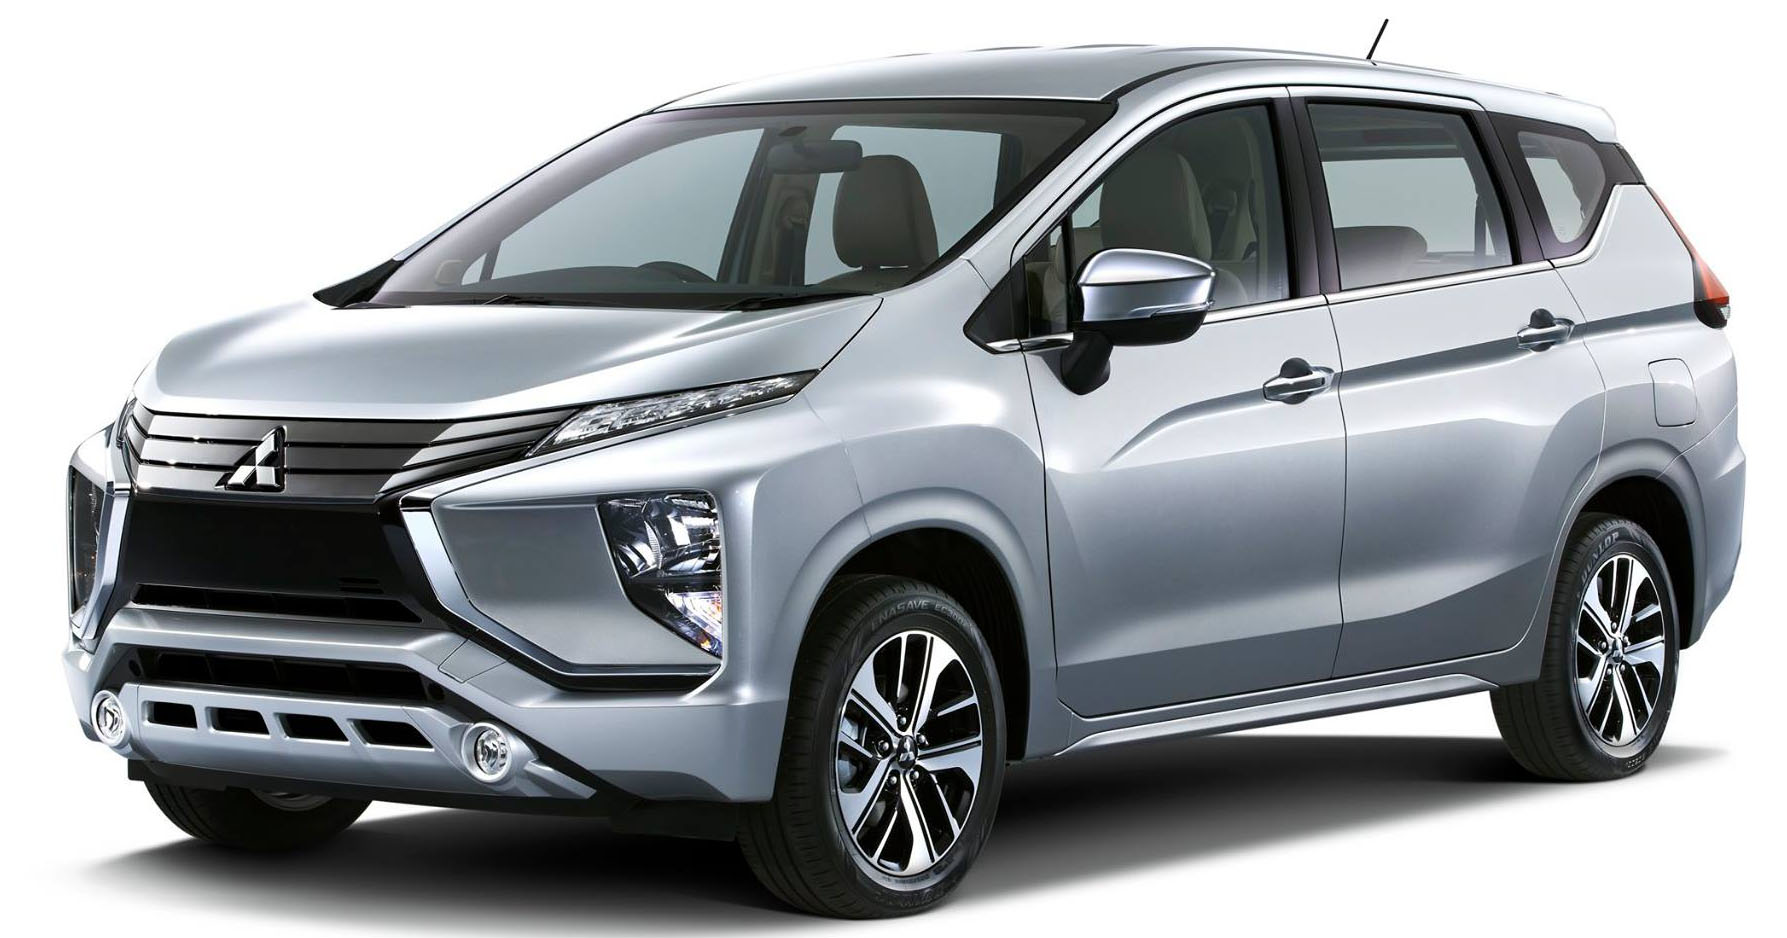 News - Mitsubishi Expander Revealed, MPVs And Crossovers Converge